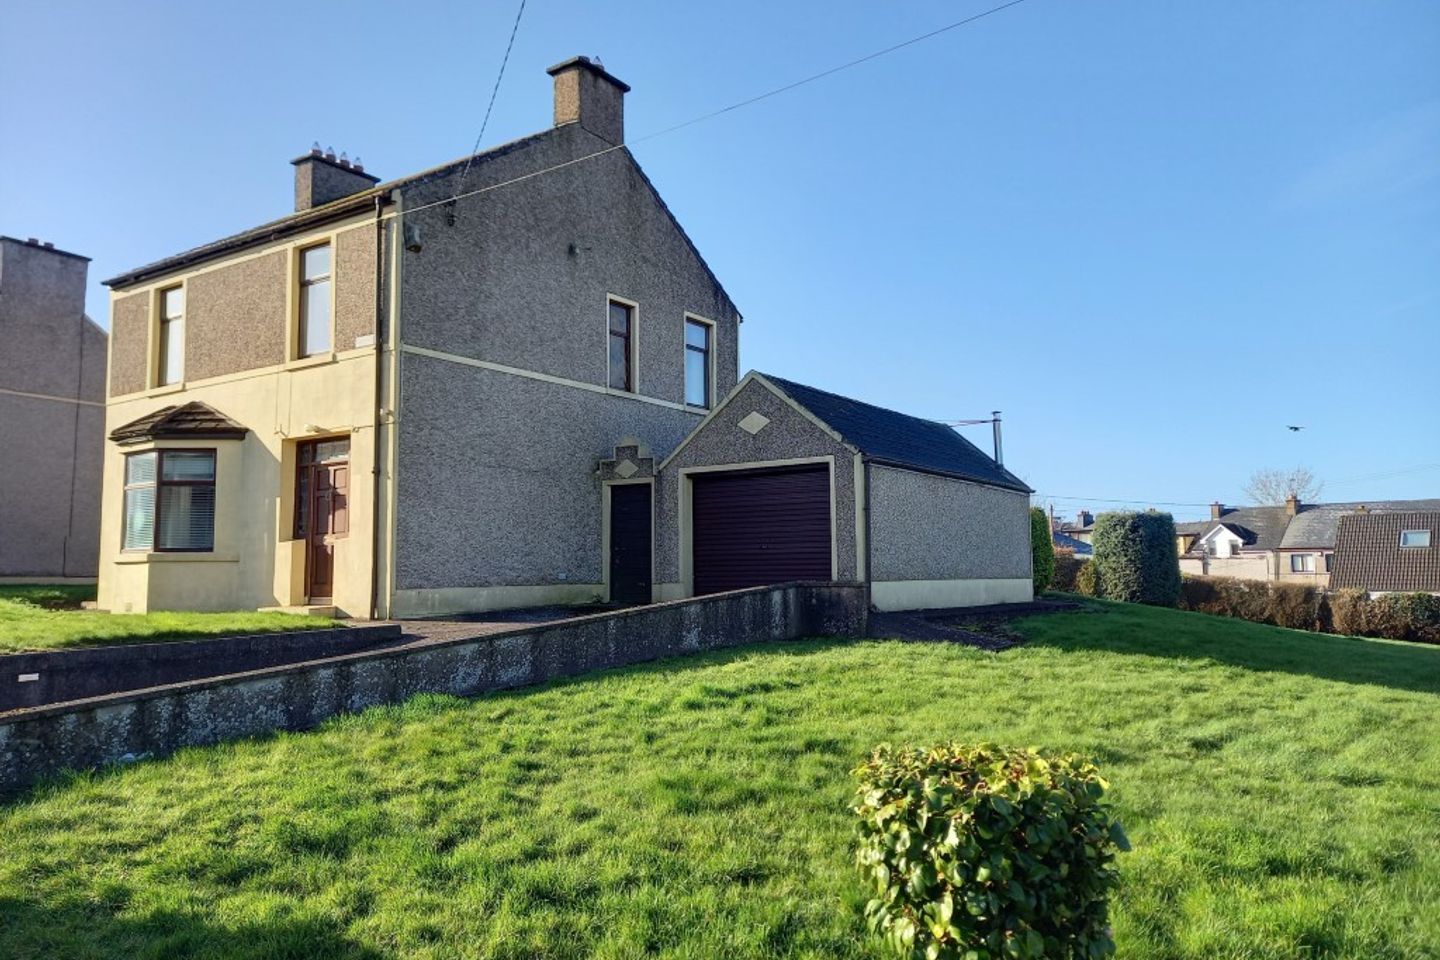 Piermount, 6 Glenview Place, New Road, Dillons Cross, Co. Cork, T23E93A